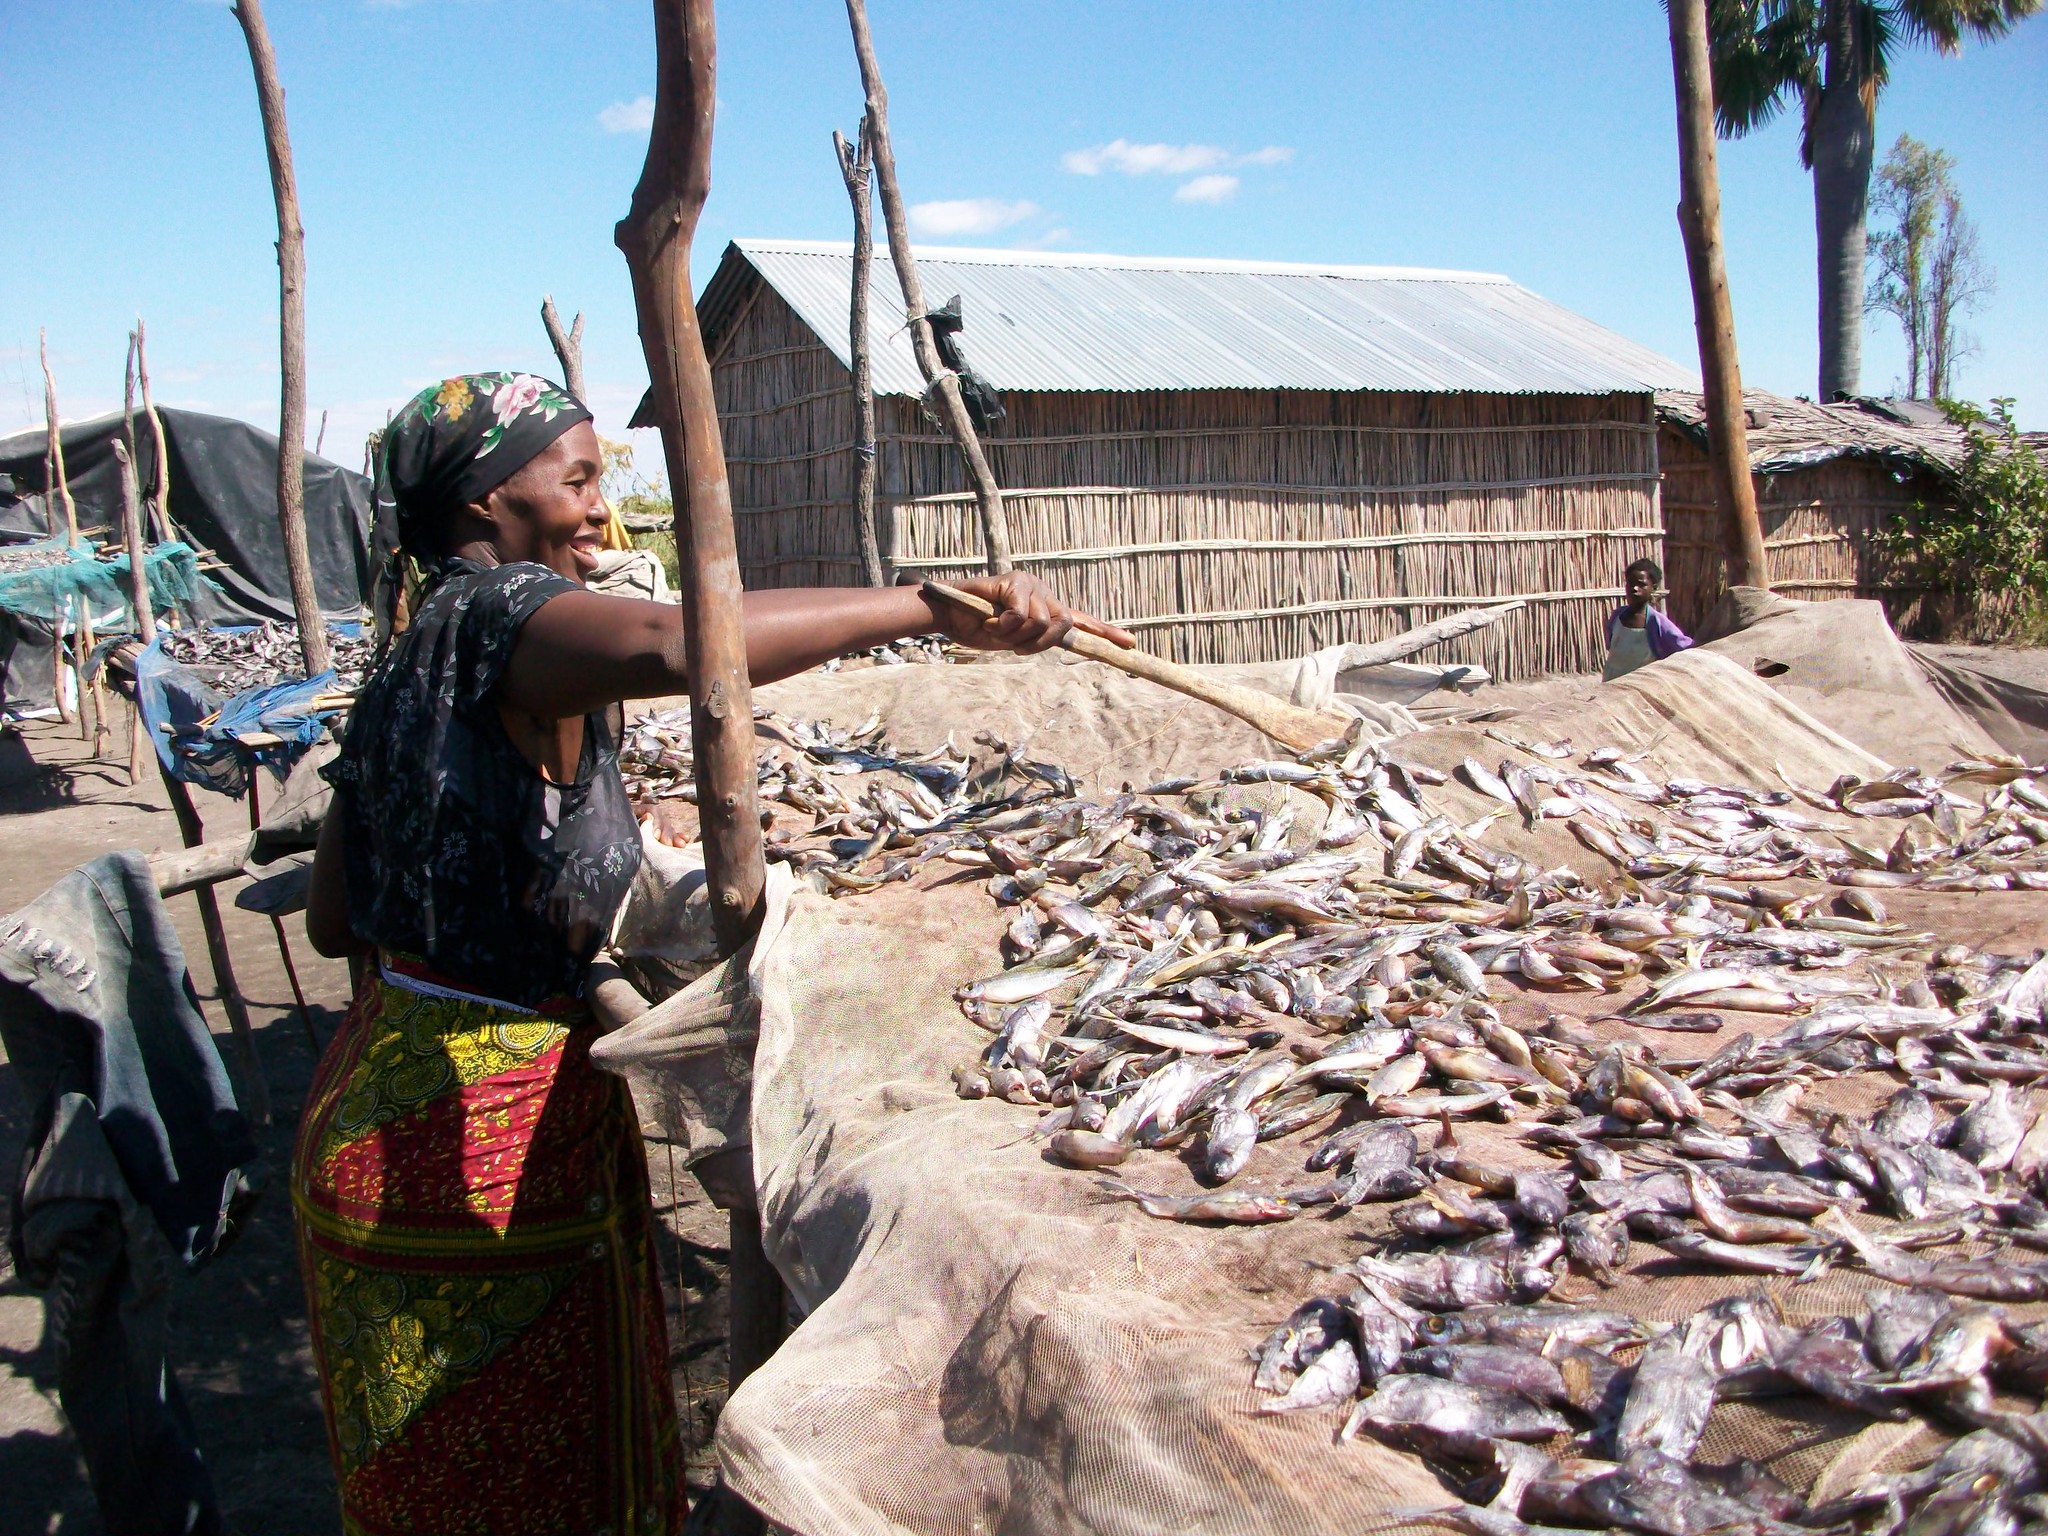 Aquatic food systems directly provide income opportunities for millions of people, many of whom are women from marginal coastal and indigenous populations. Photo by Anna Fawcus.